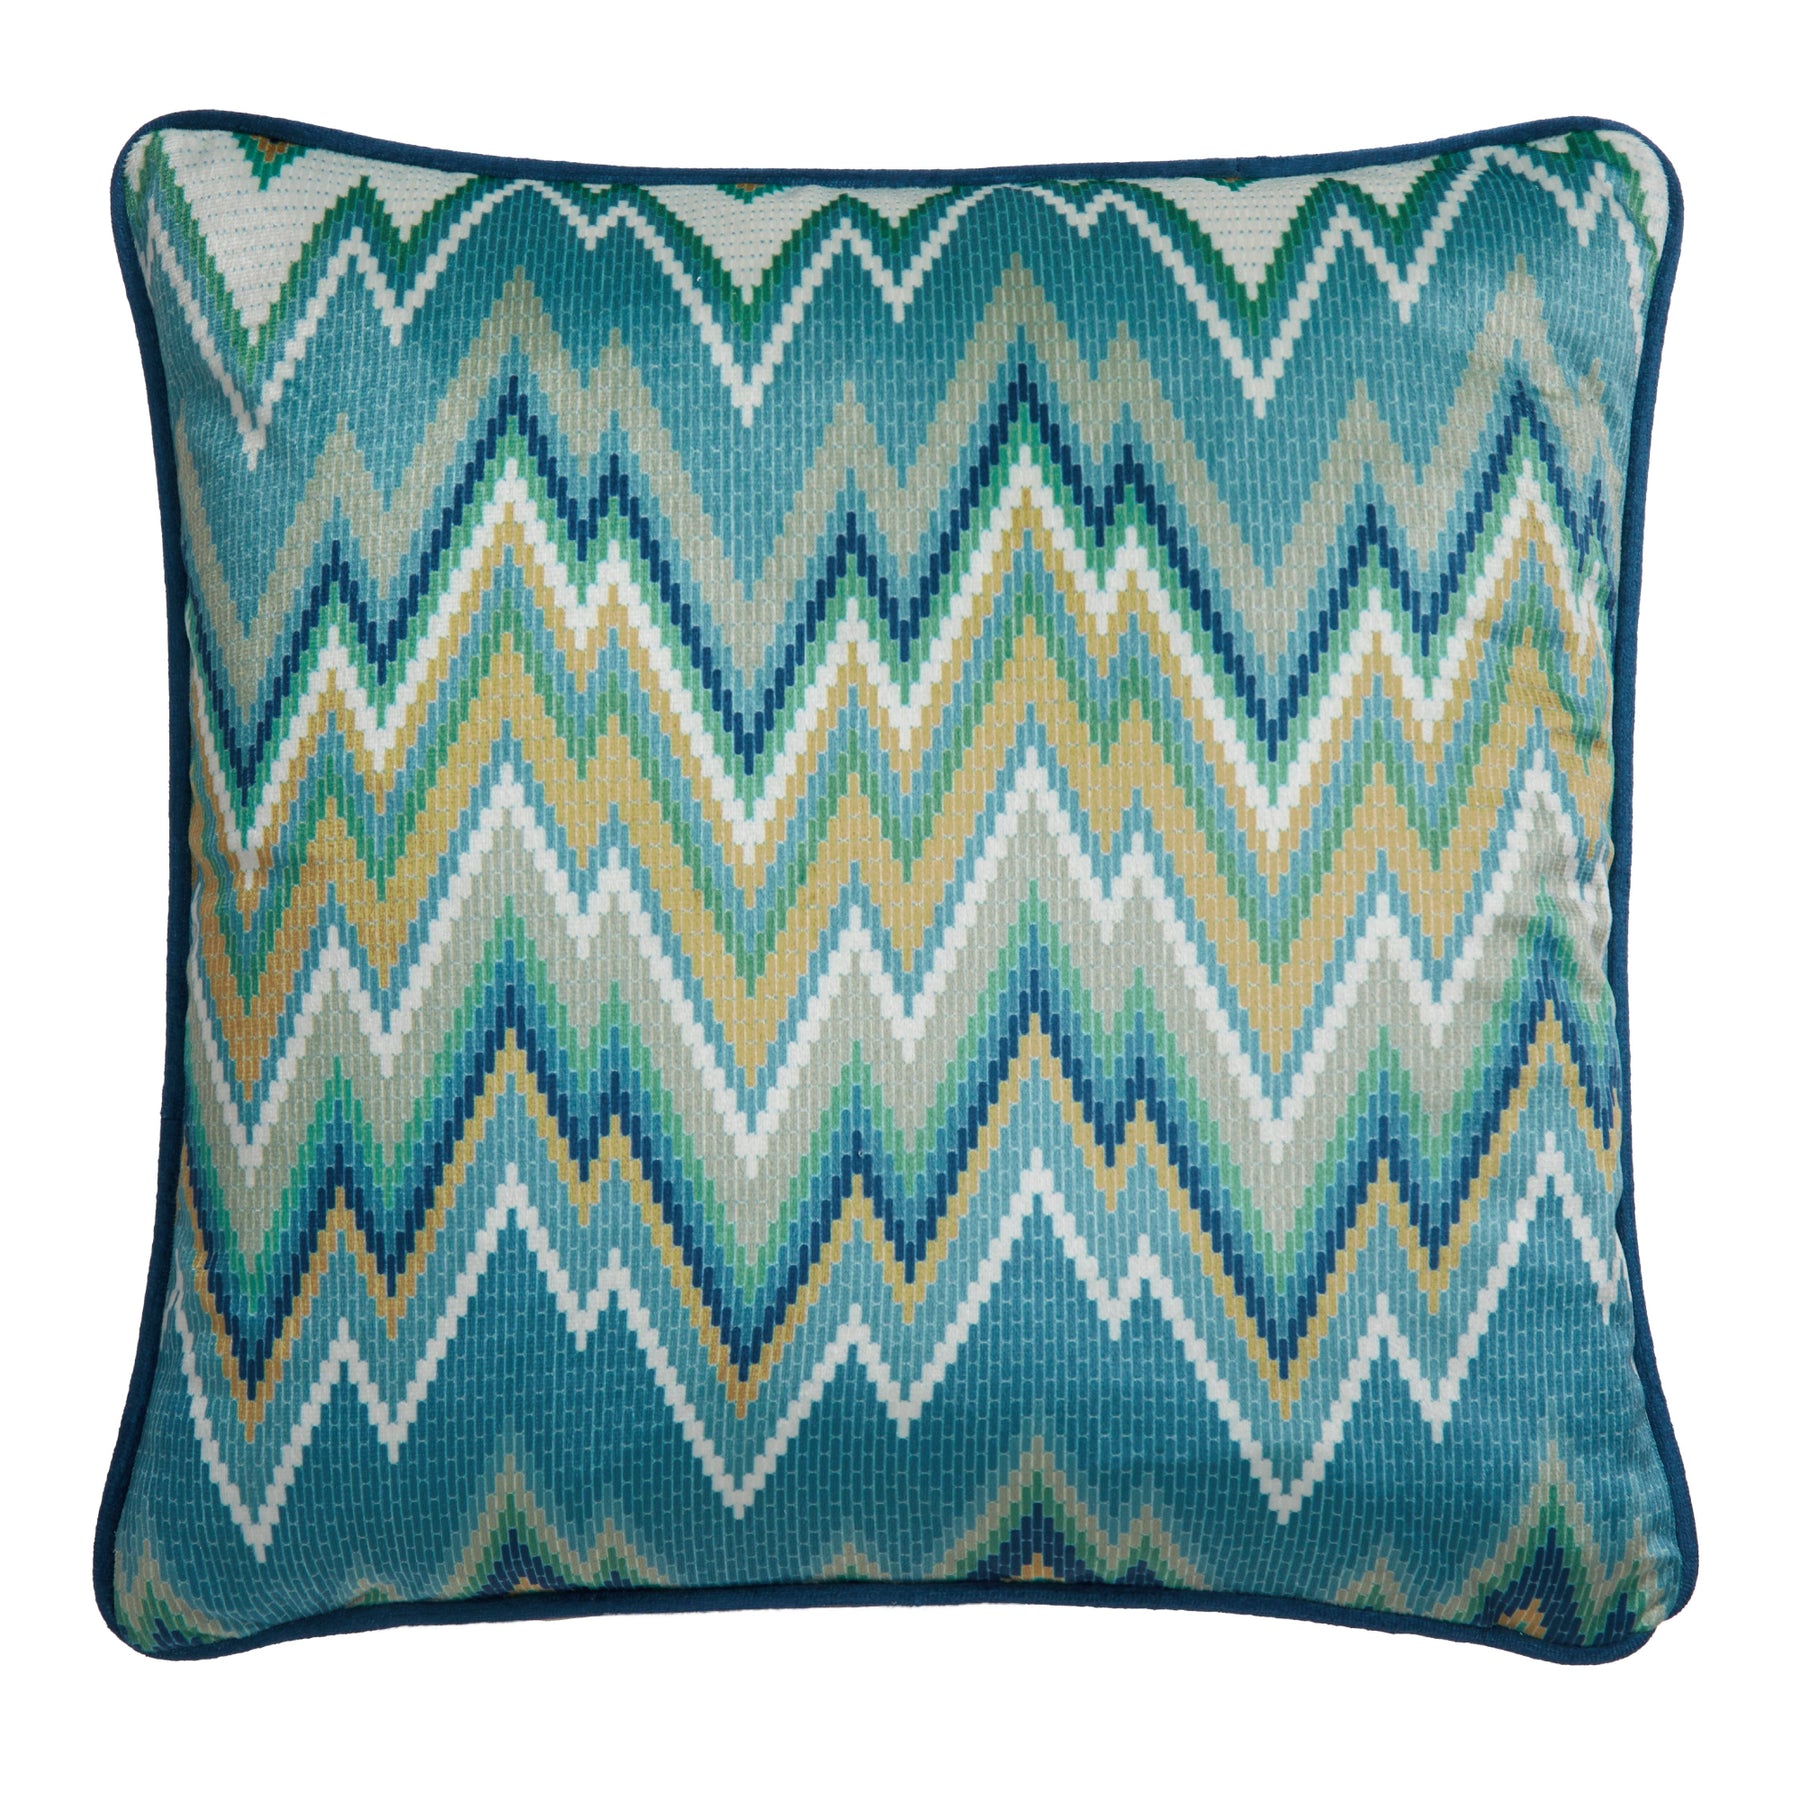 Laurence Llewelyn-Bowen Pants On Fire Filled Cushion 43cm x 43cm Teal Green